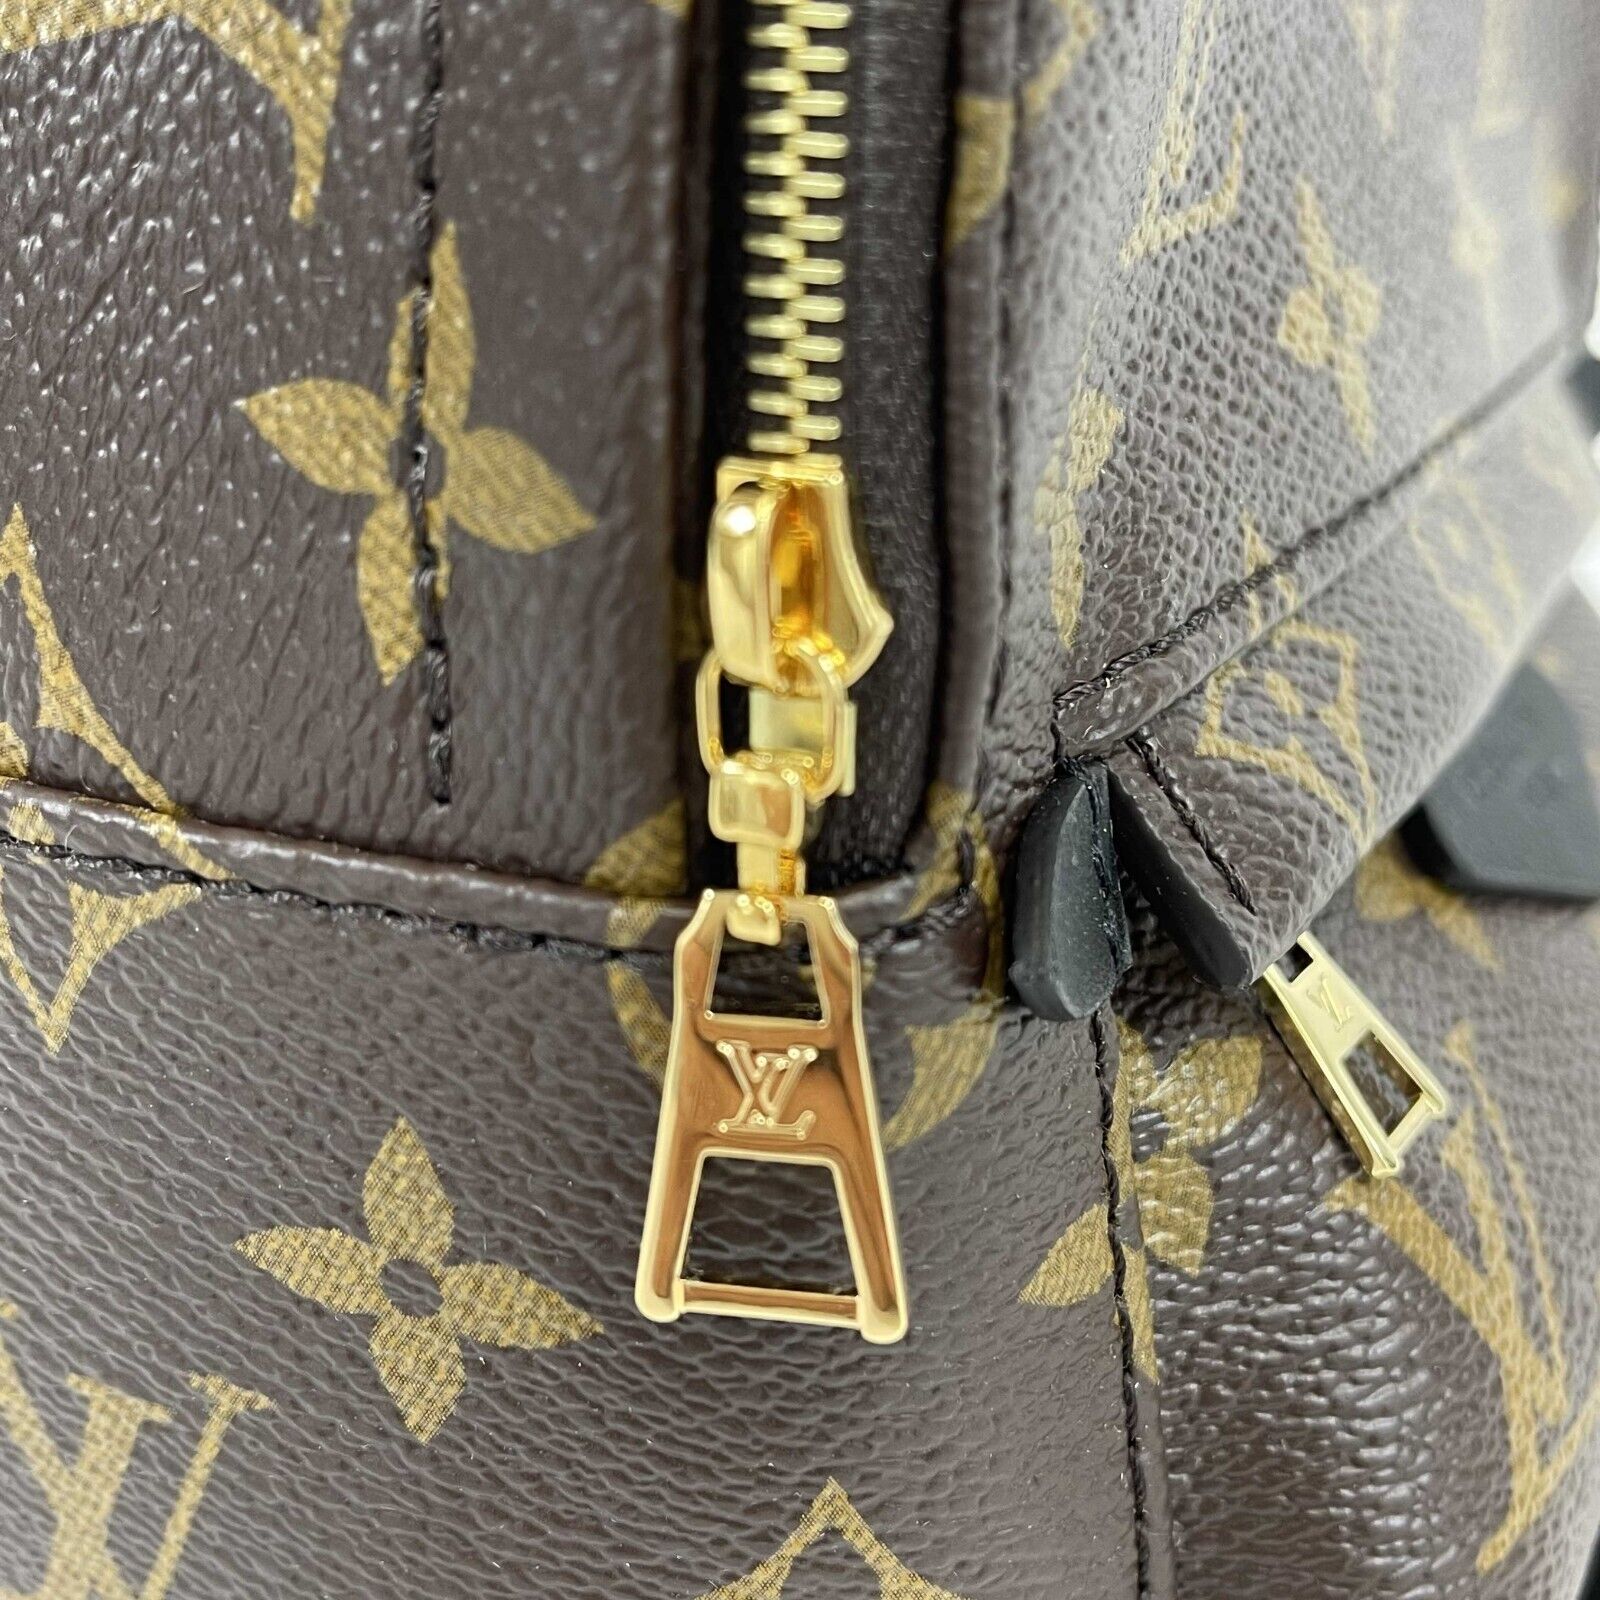 Louis Vuitton - NEW Palm Springs Mini - Brown Backpack / Crossbody RETAIL  $2440